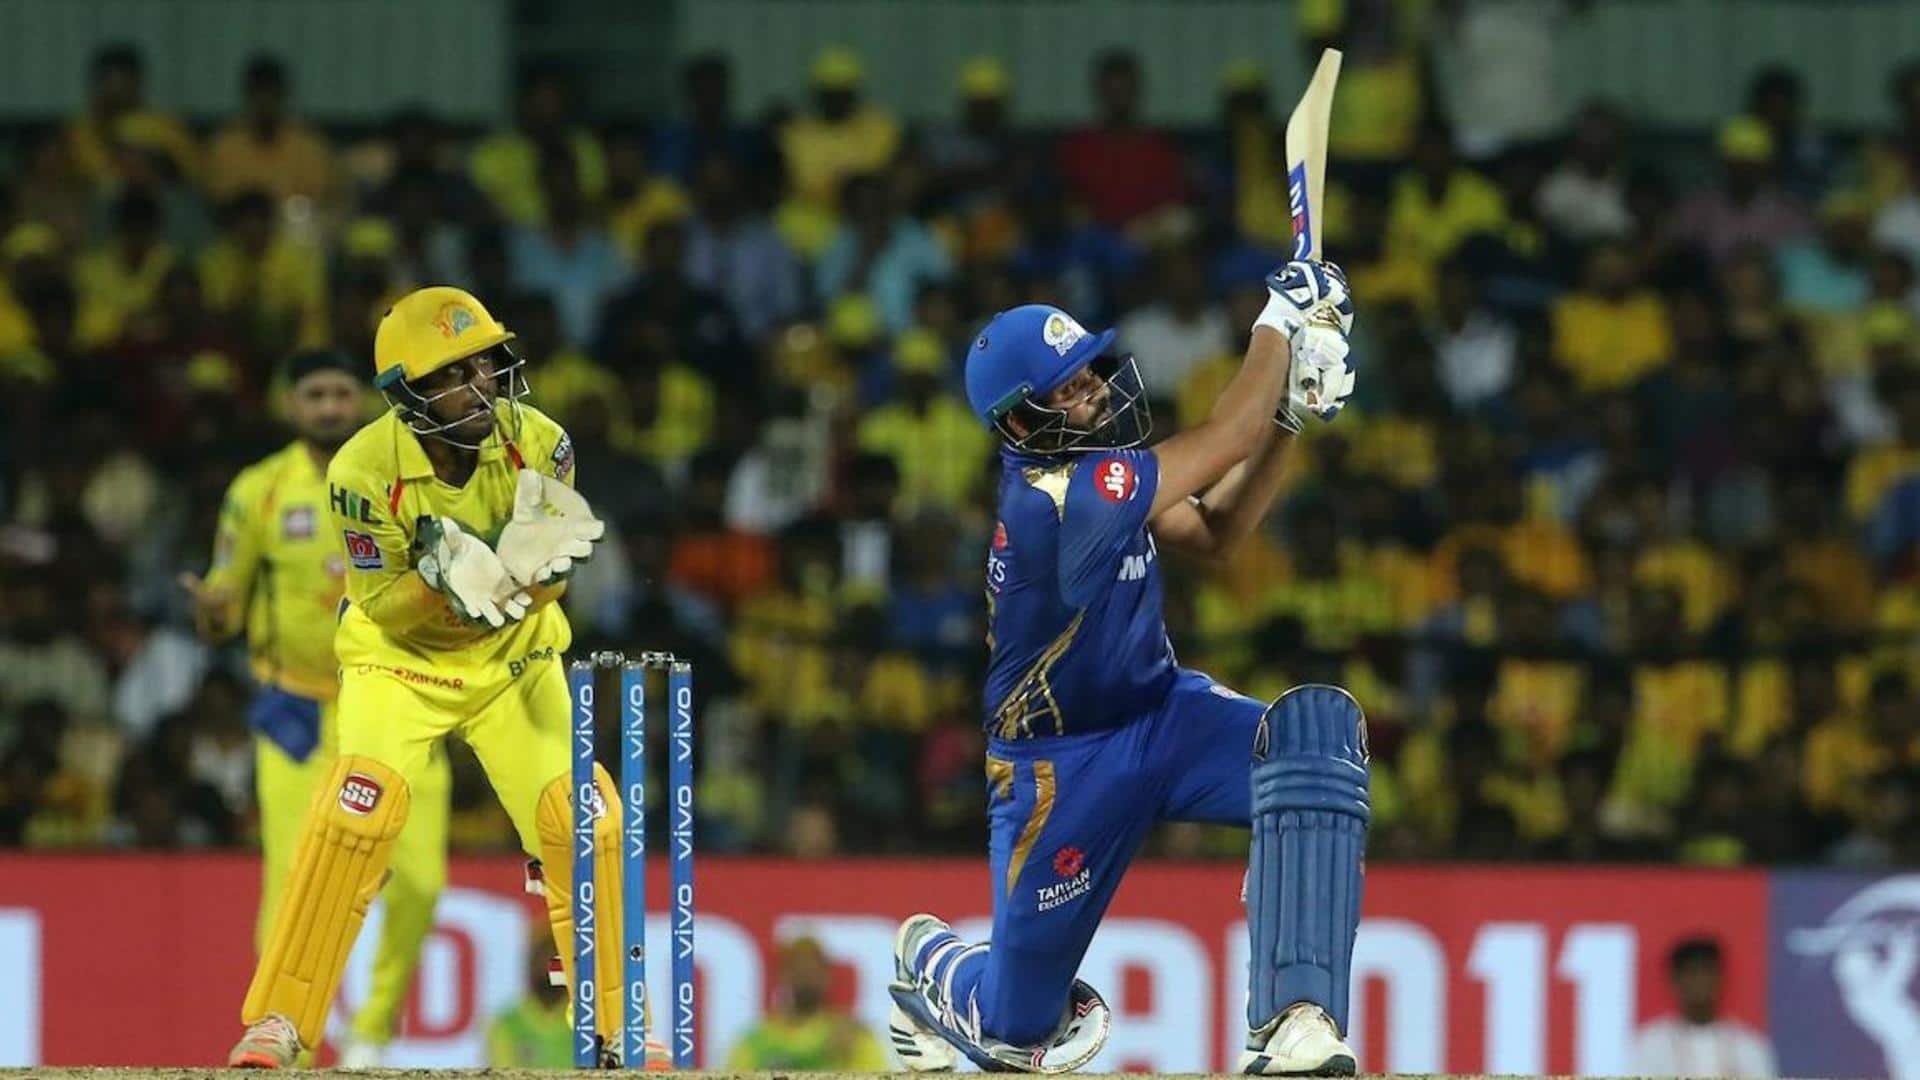 IPL 2023, MI vs CSK: Here is the statistical preview